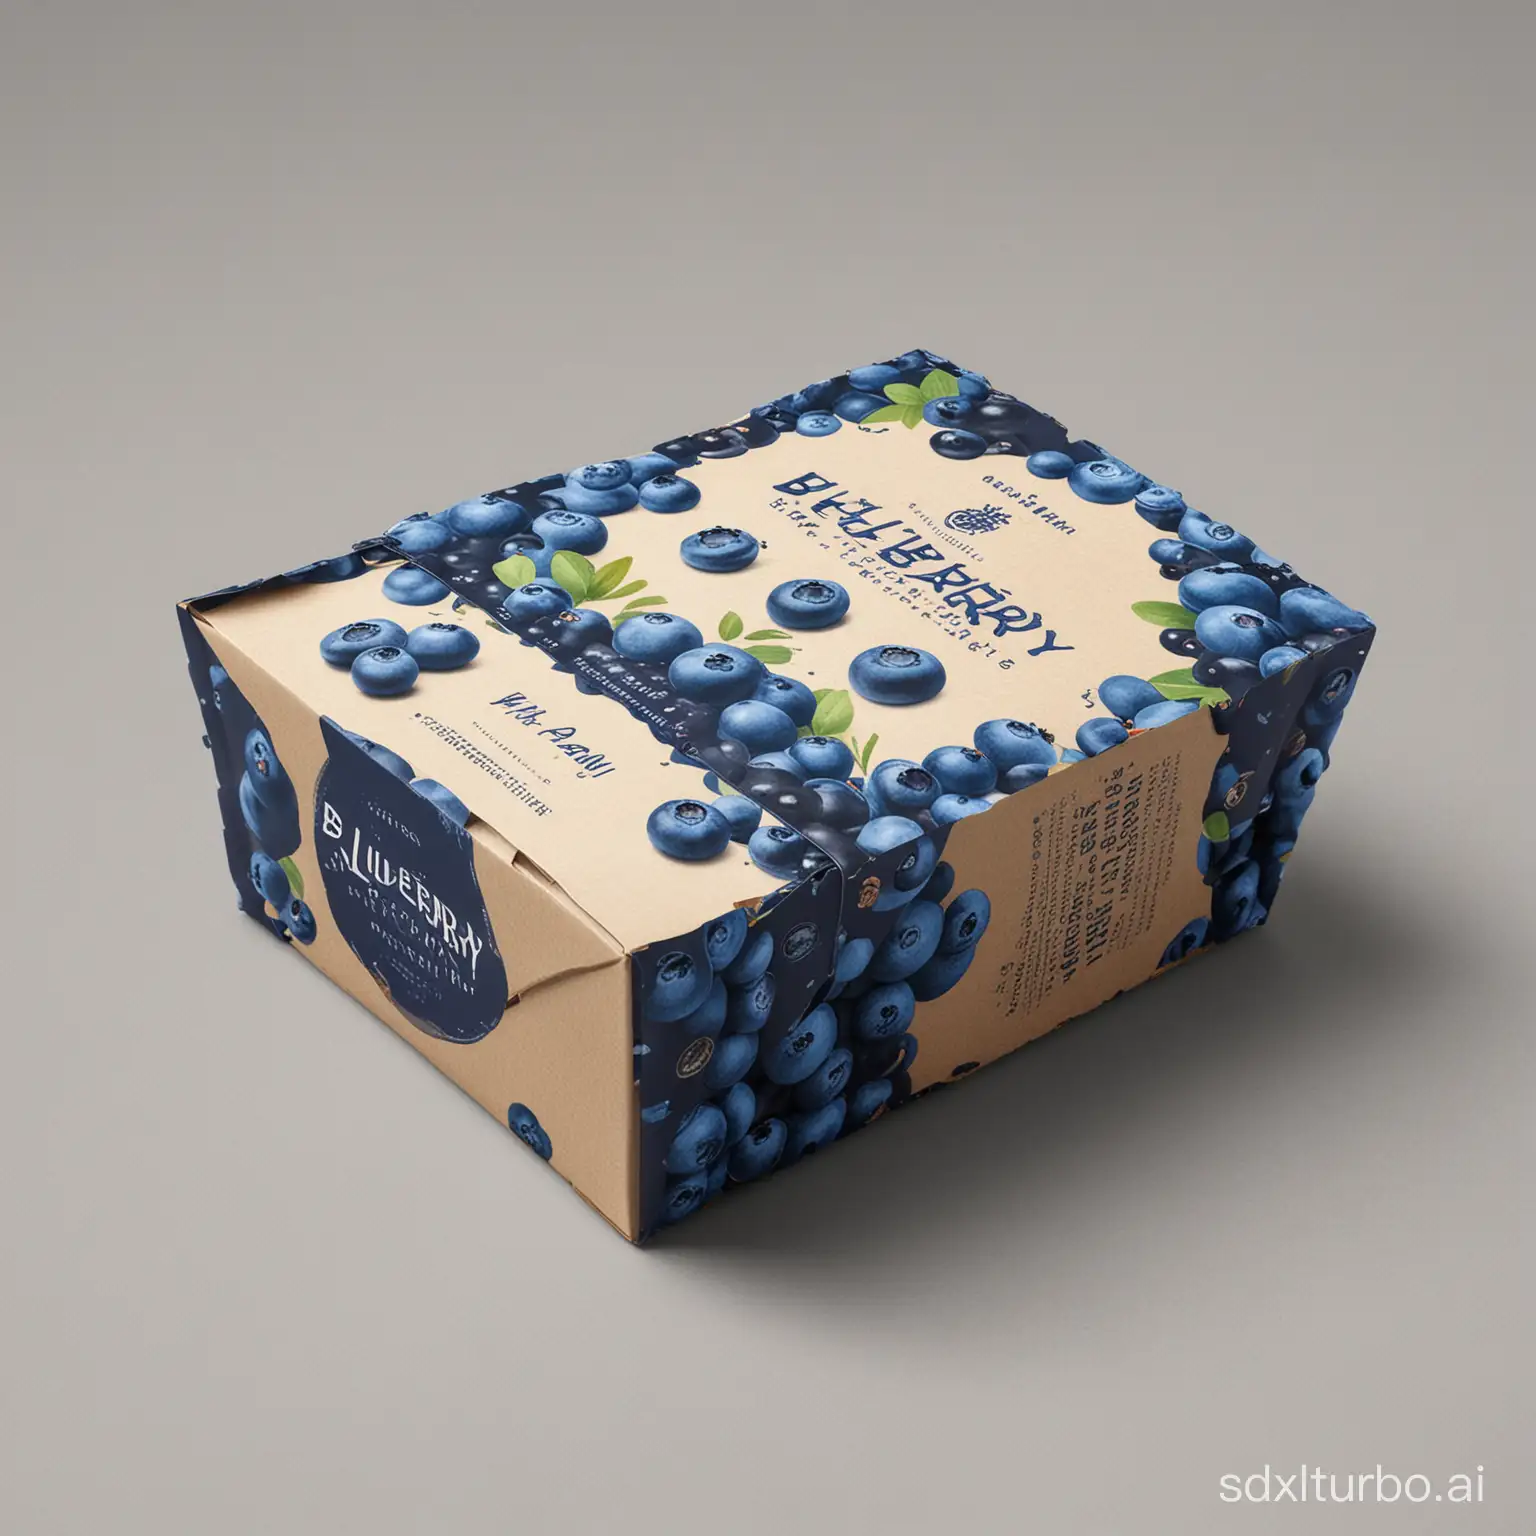 Fresh-Blueberry-Packaging-Design-with-Vibrant-Fruit-Imagery